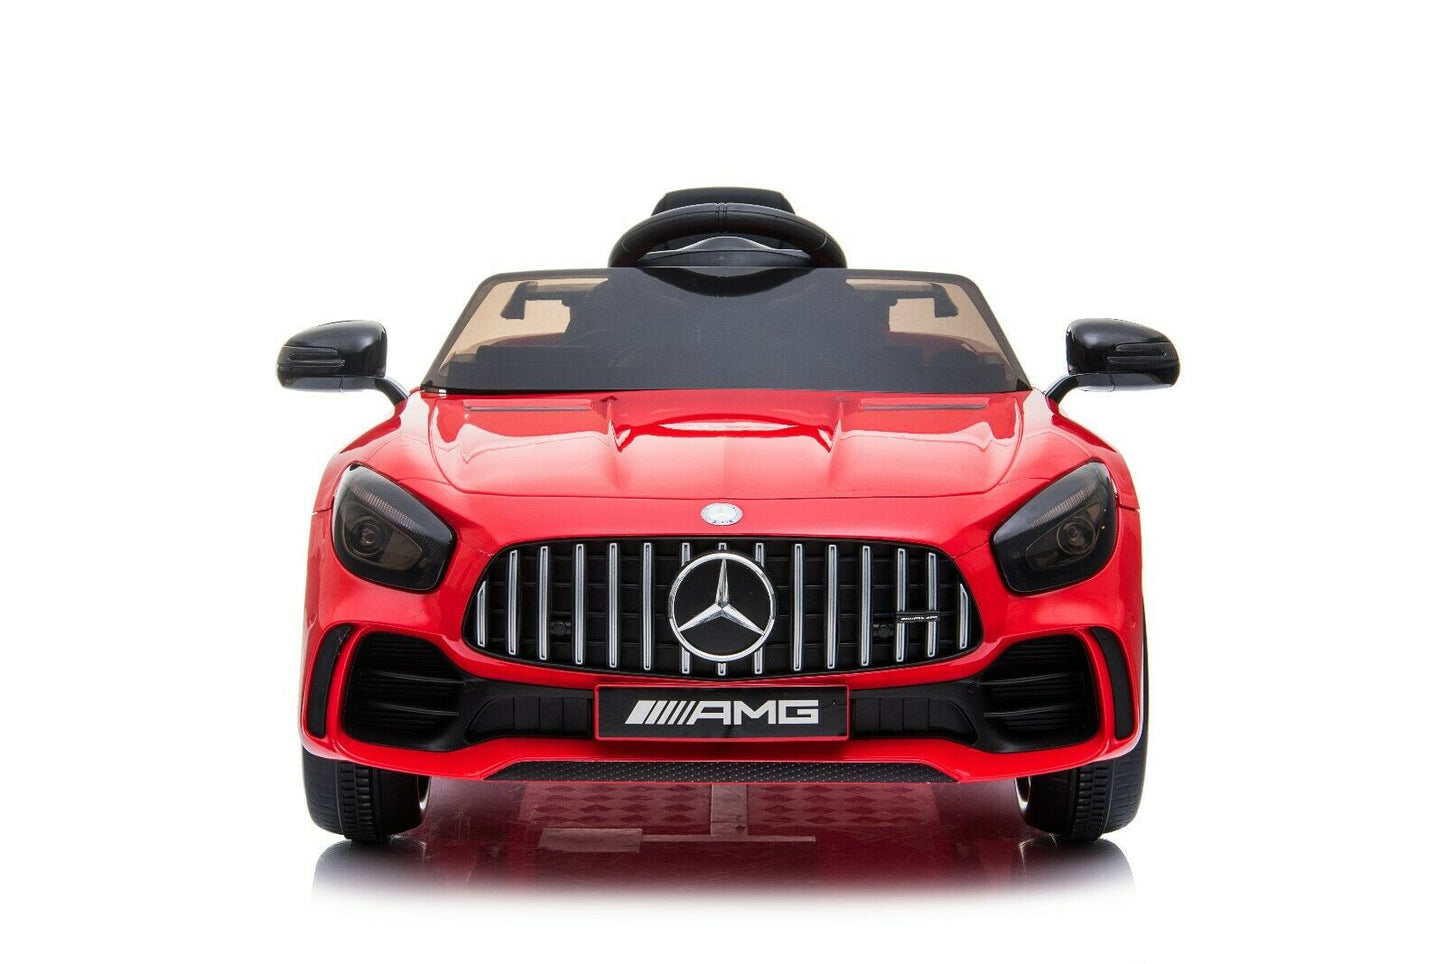 "Red two-seater Mercedes AMG GTR, electric ride-on car for kids with parent remote and music connectivity features, set against a white background."